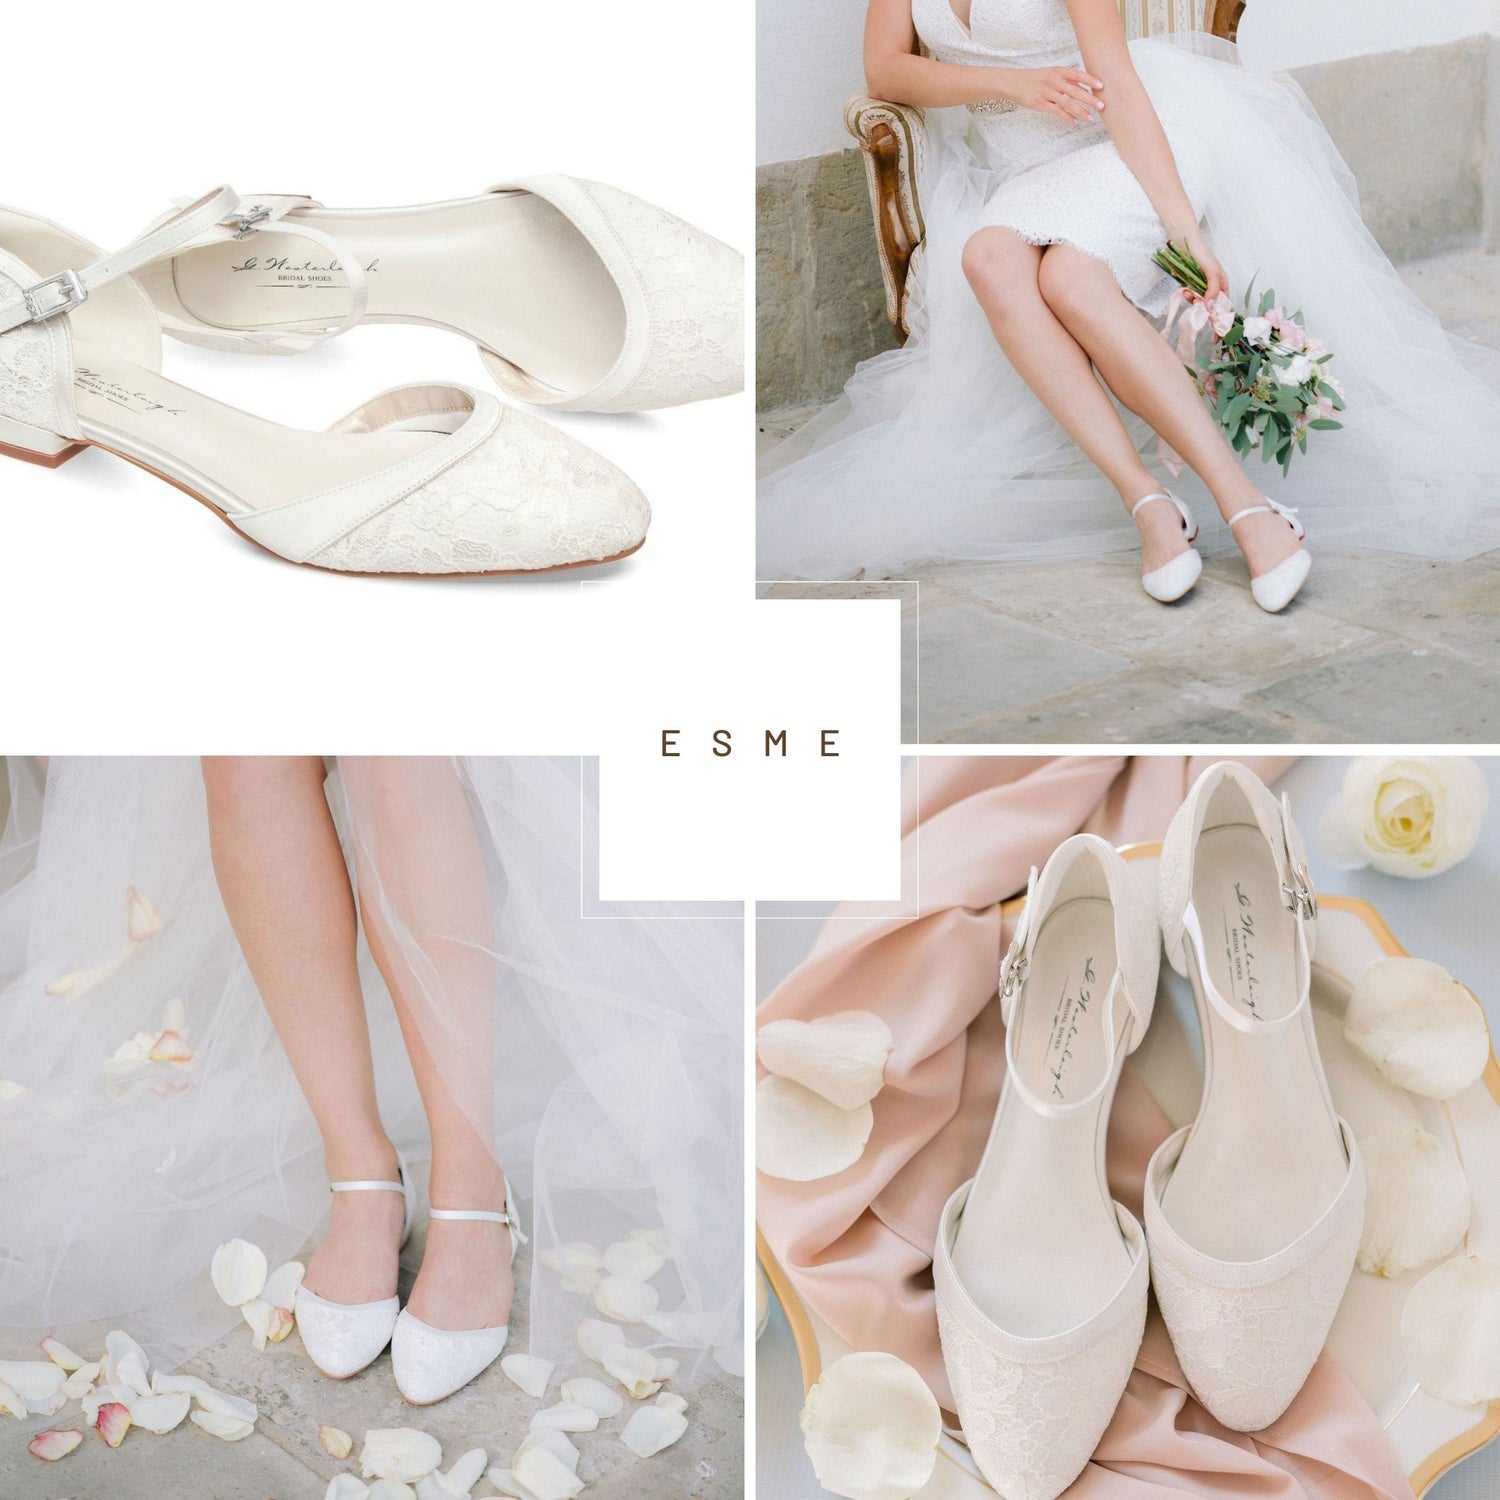 White Pointed Toe High Heel Flower Wedding Shoes Bride Ladies High Shallow  Ankle Strap Fashion Party Dress Shoes Lace-up Pumps - Pumps - AliExpress